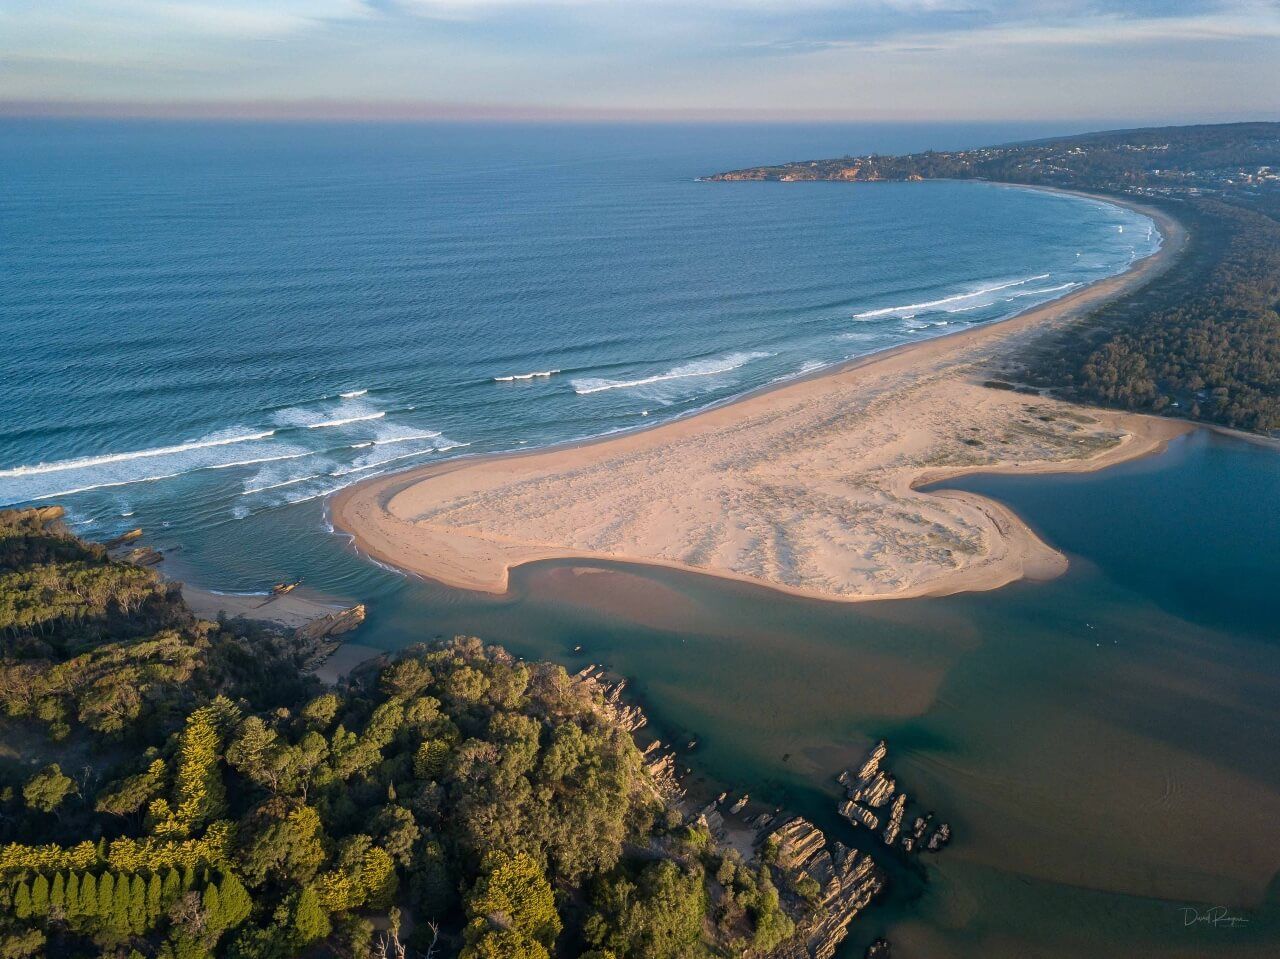 The Destination Agency, Sapphire Coast - Tathra Recovery Campaign - Tourism Marketing Project